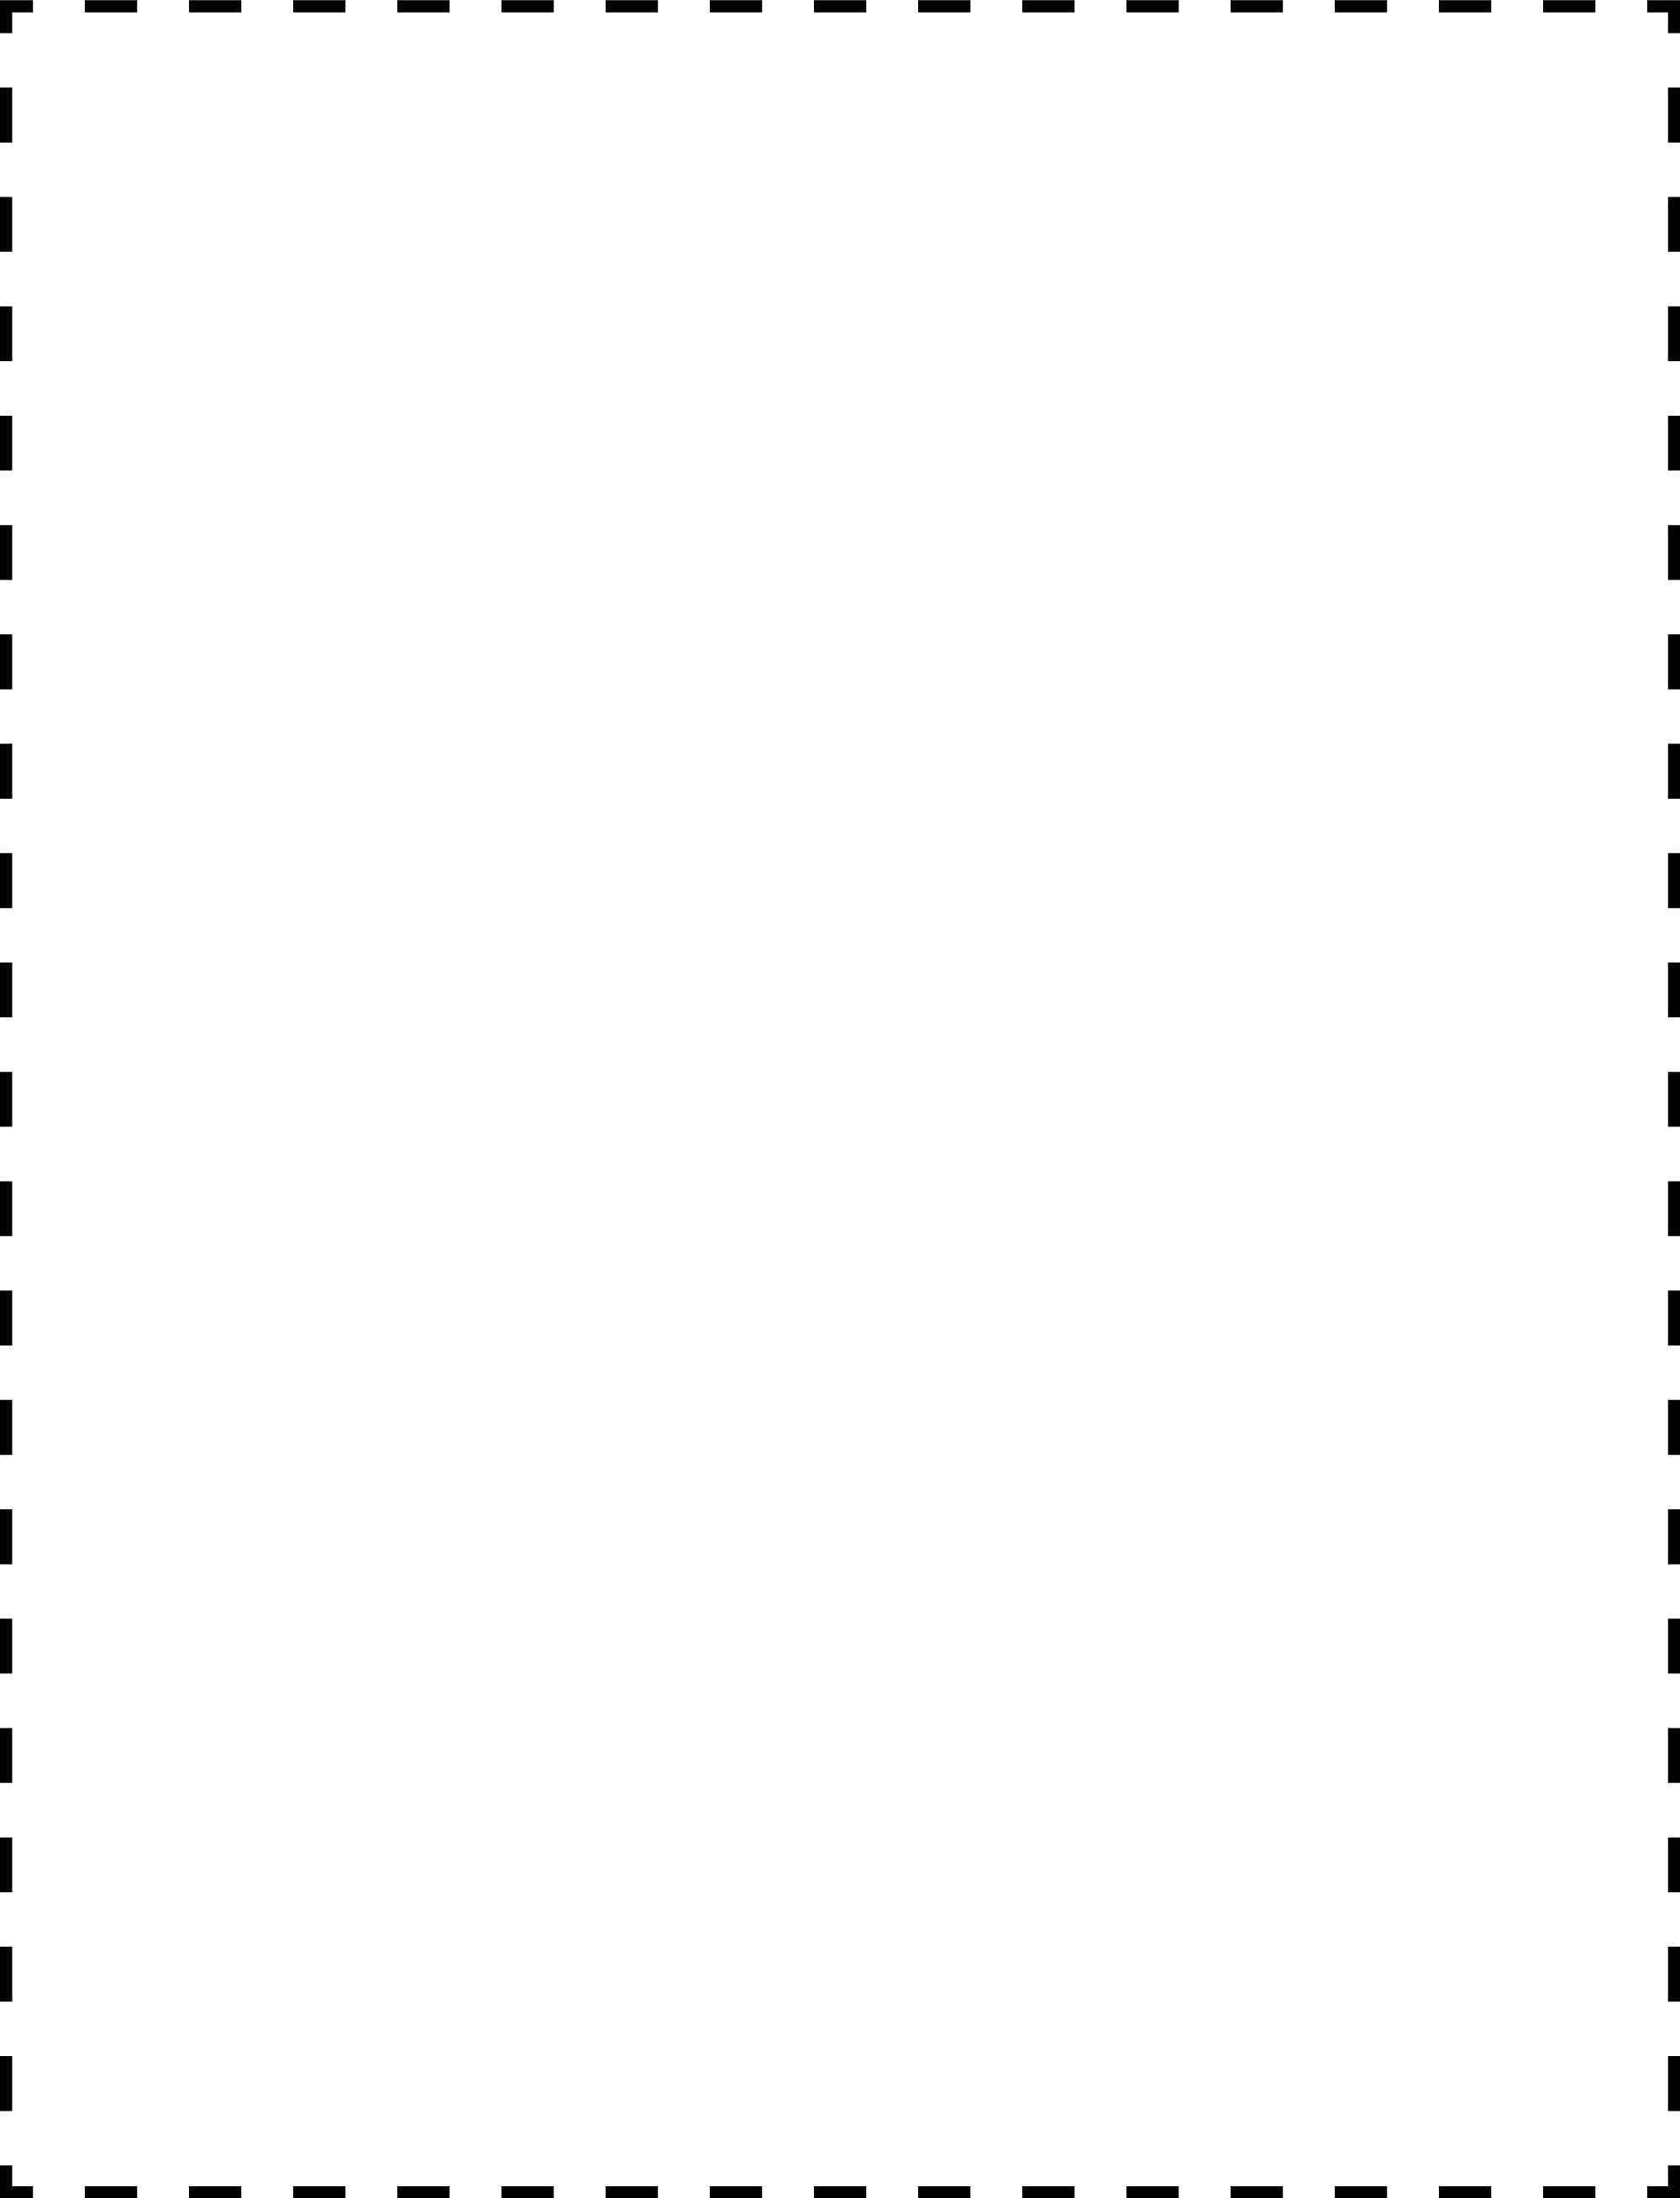 506-coupon-outline-4x5-k.png